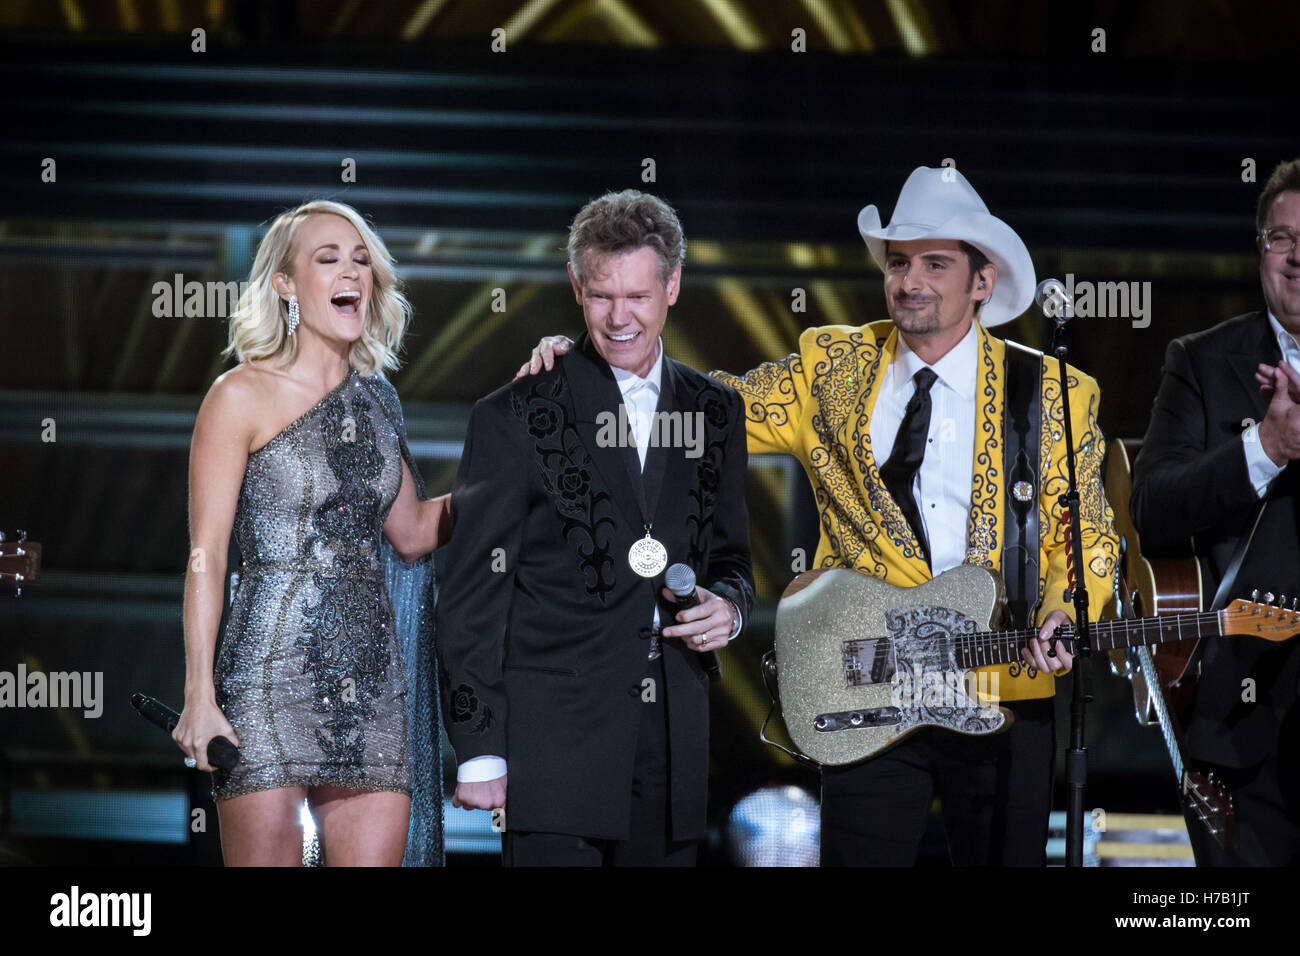 CMA Awards 2016: All About Carrie Underwood and Brad Paisley's